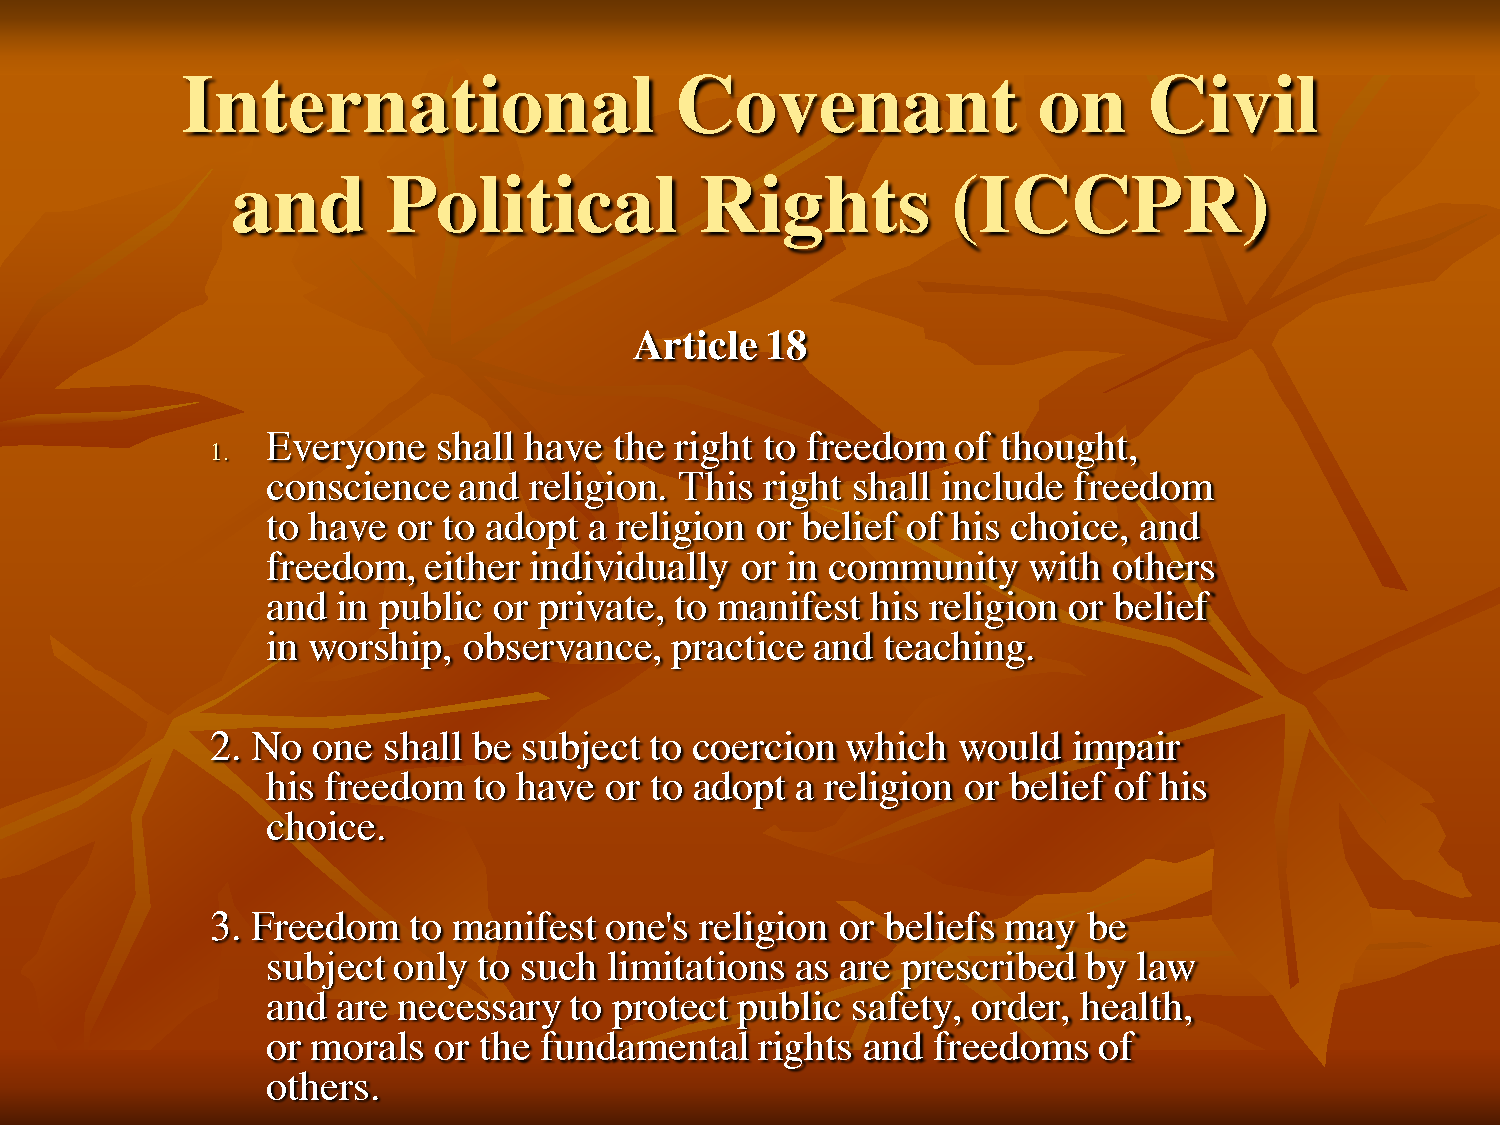 International Convenant on Civil and Political Rights